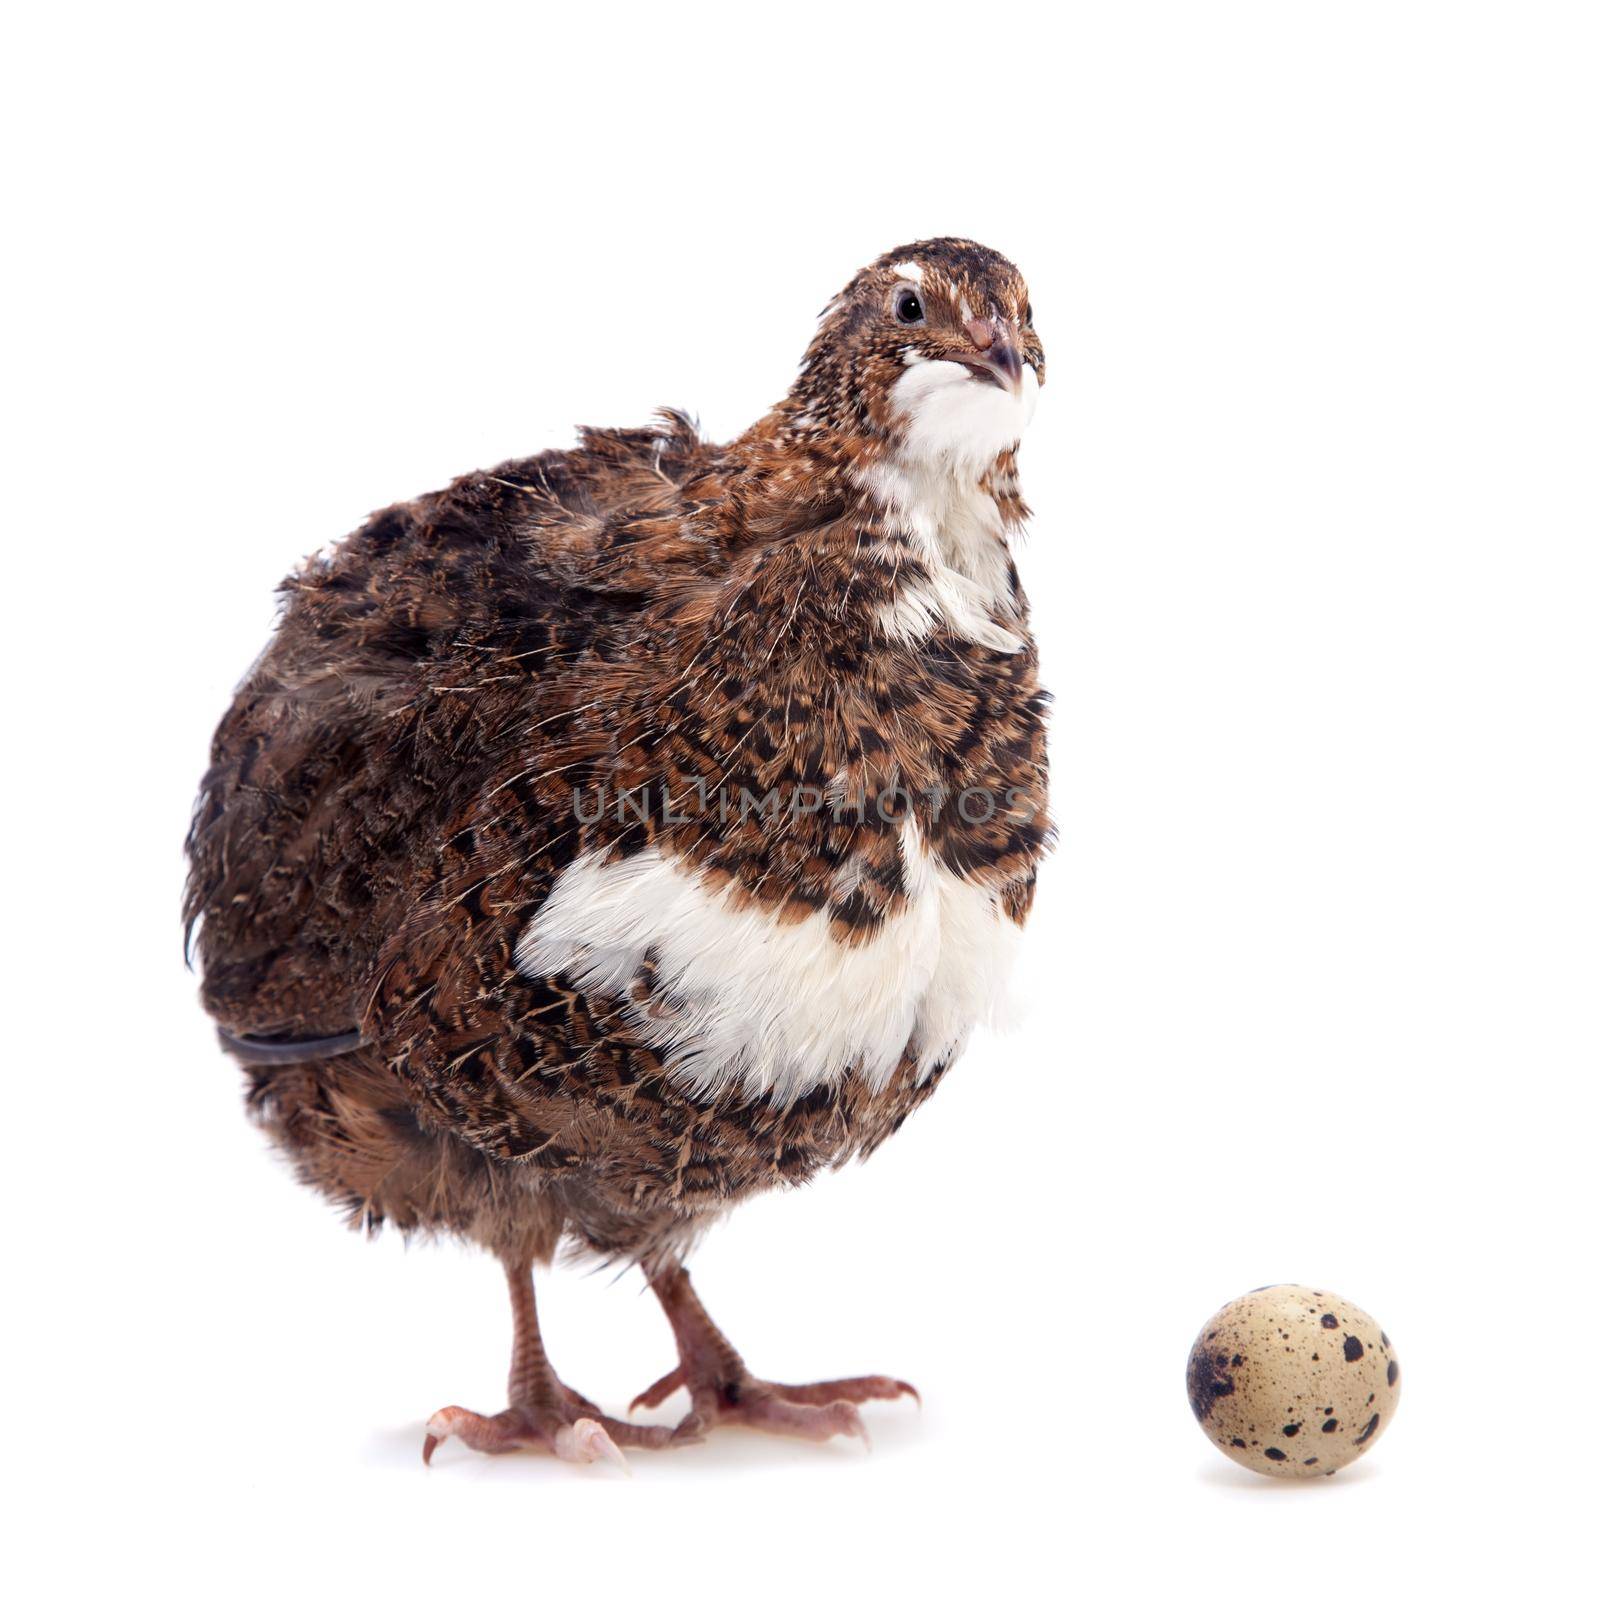 The common quail, coturnix coturnix, with its eggs isolated on white background